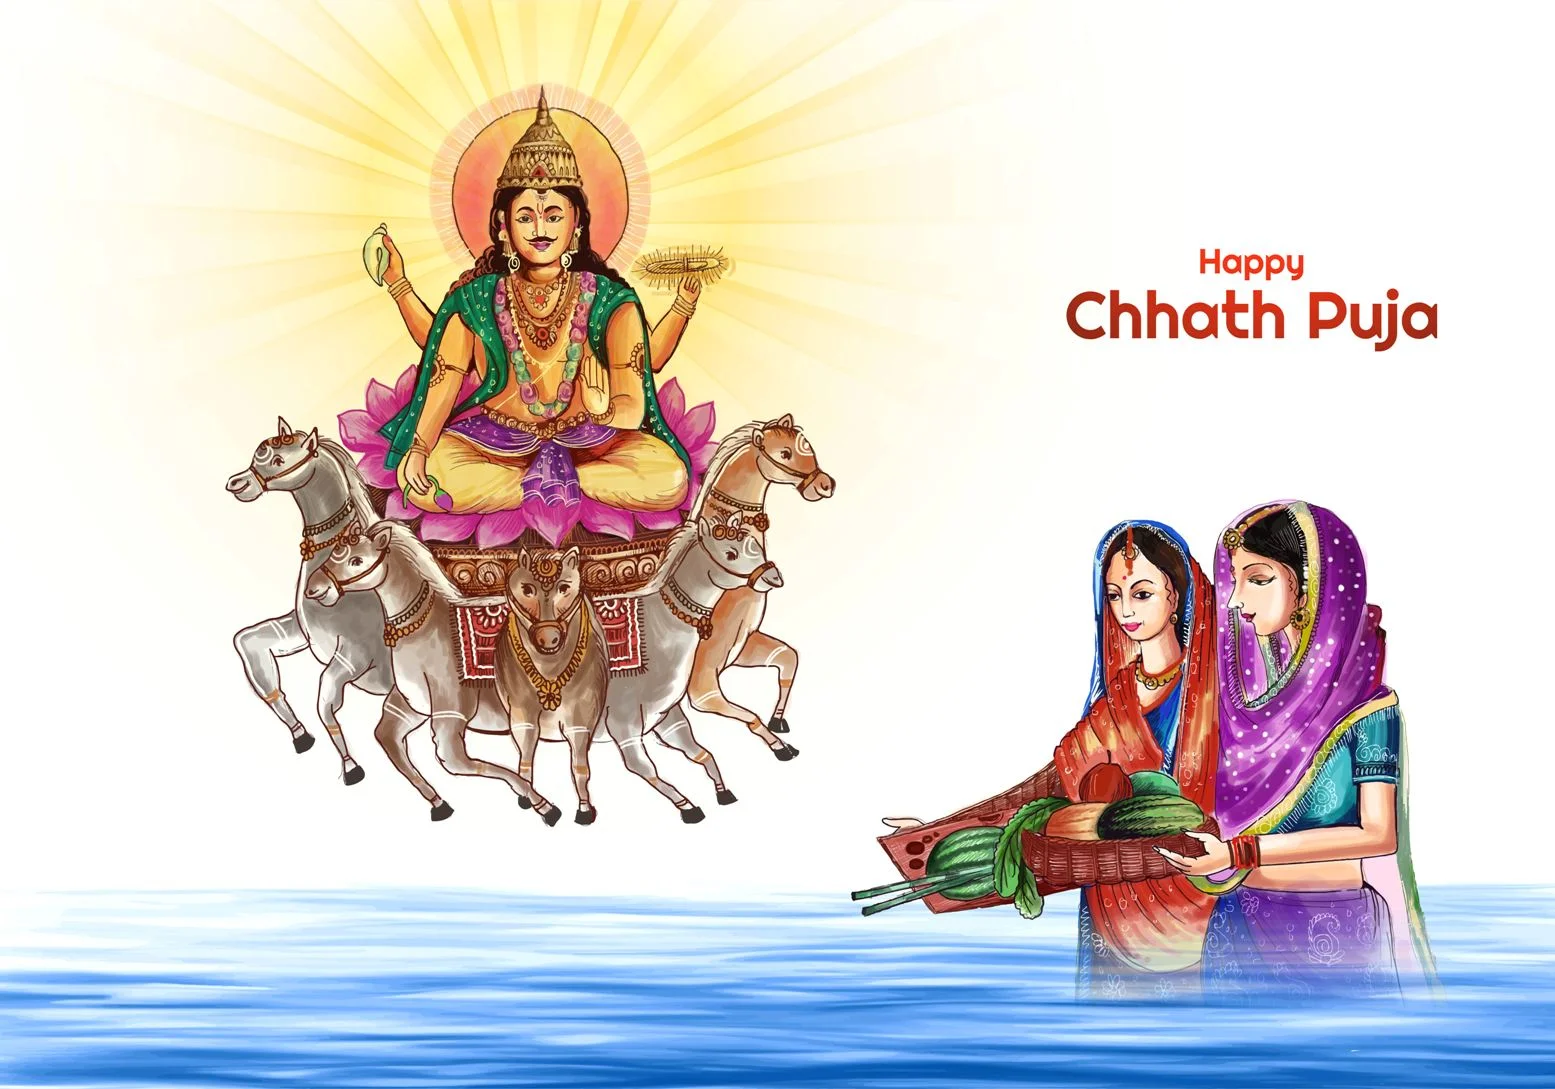 Happy Chhath Puja Wallpapers